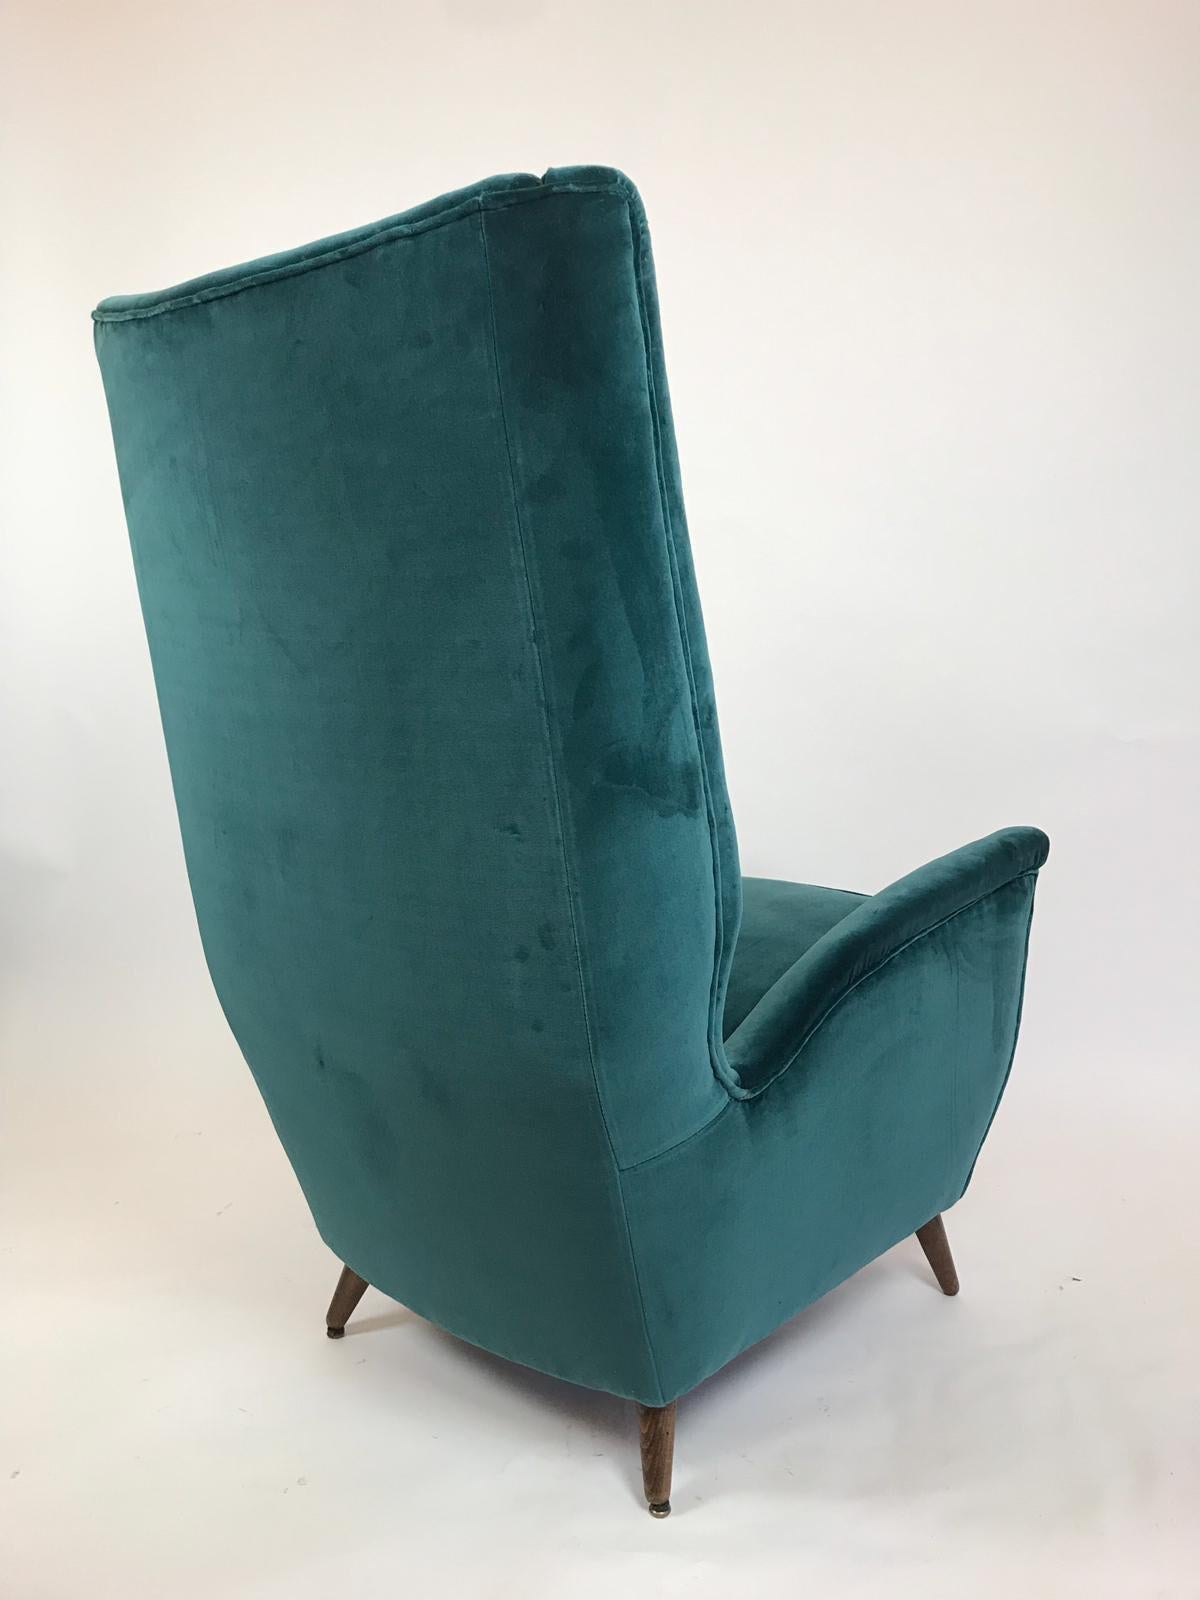 Italian Gio Ponti Pair of High Back Armchairs Newly Upholstered in Teal Velvet